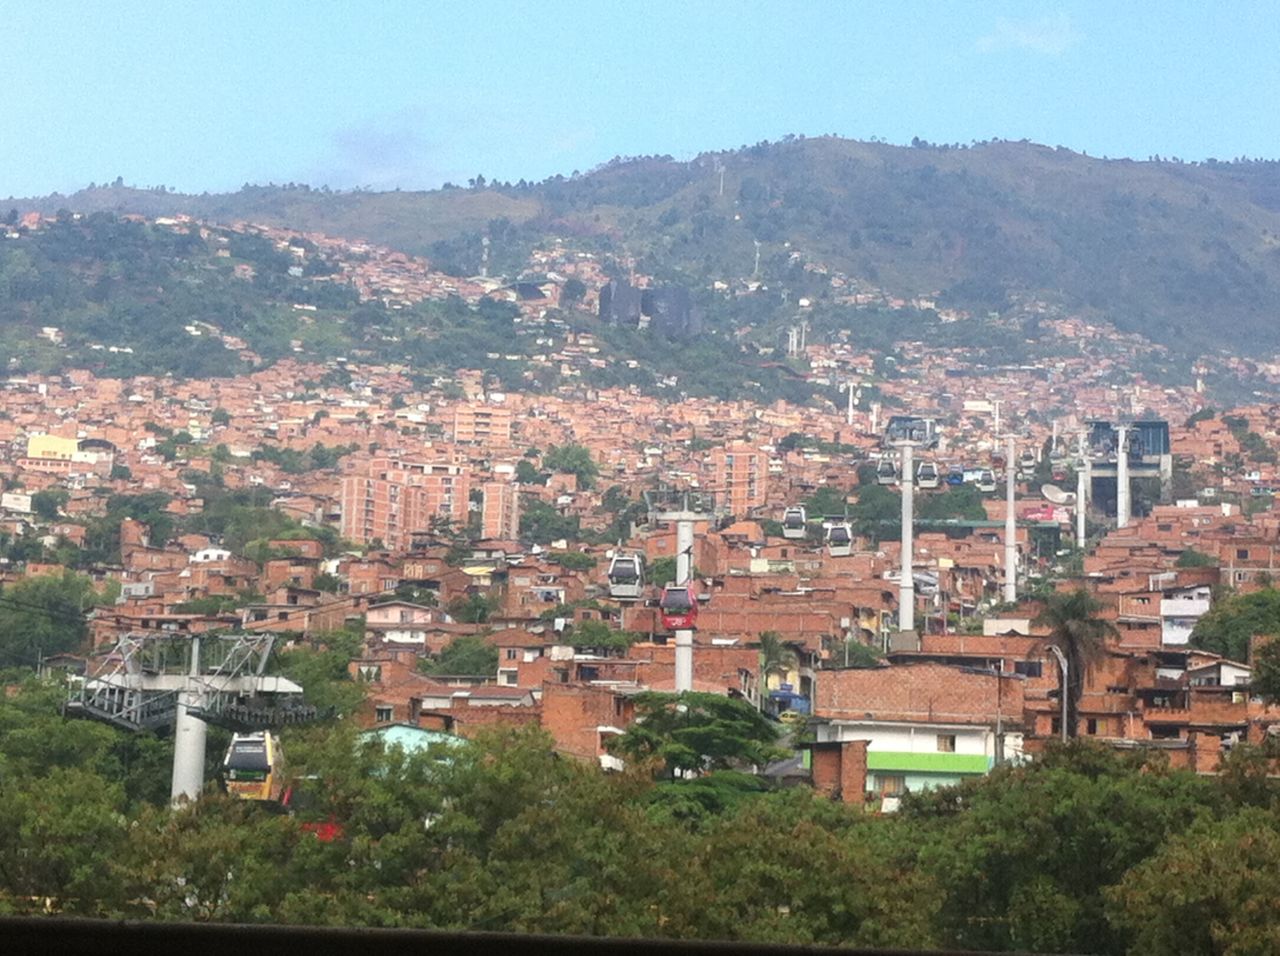 Medellin is regarded as the first city to introduce an urban gondola system. The Colombian city constructed its first Metrocable line in 2004.